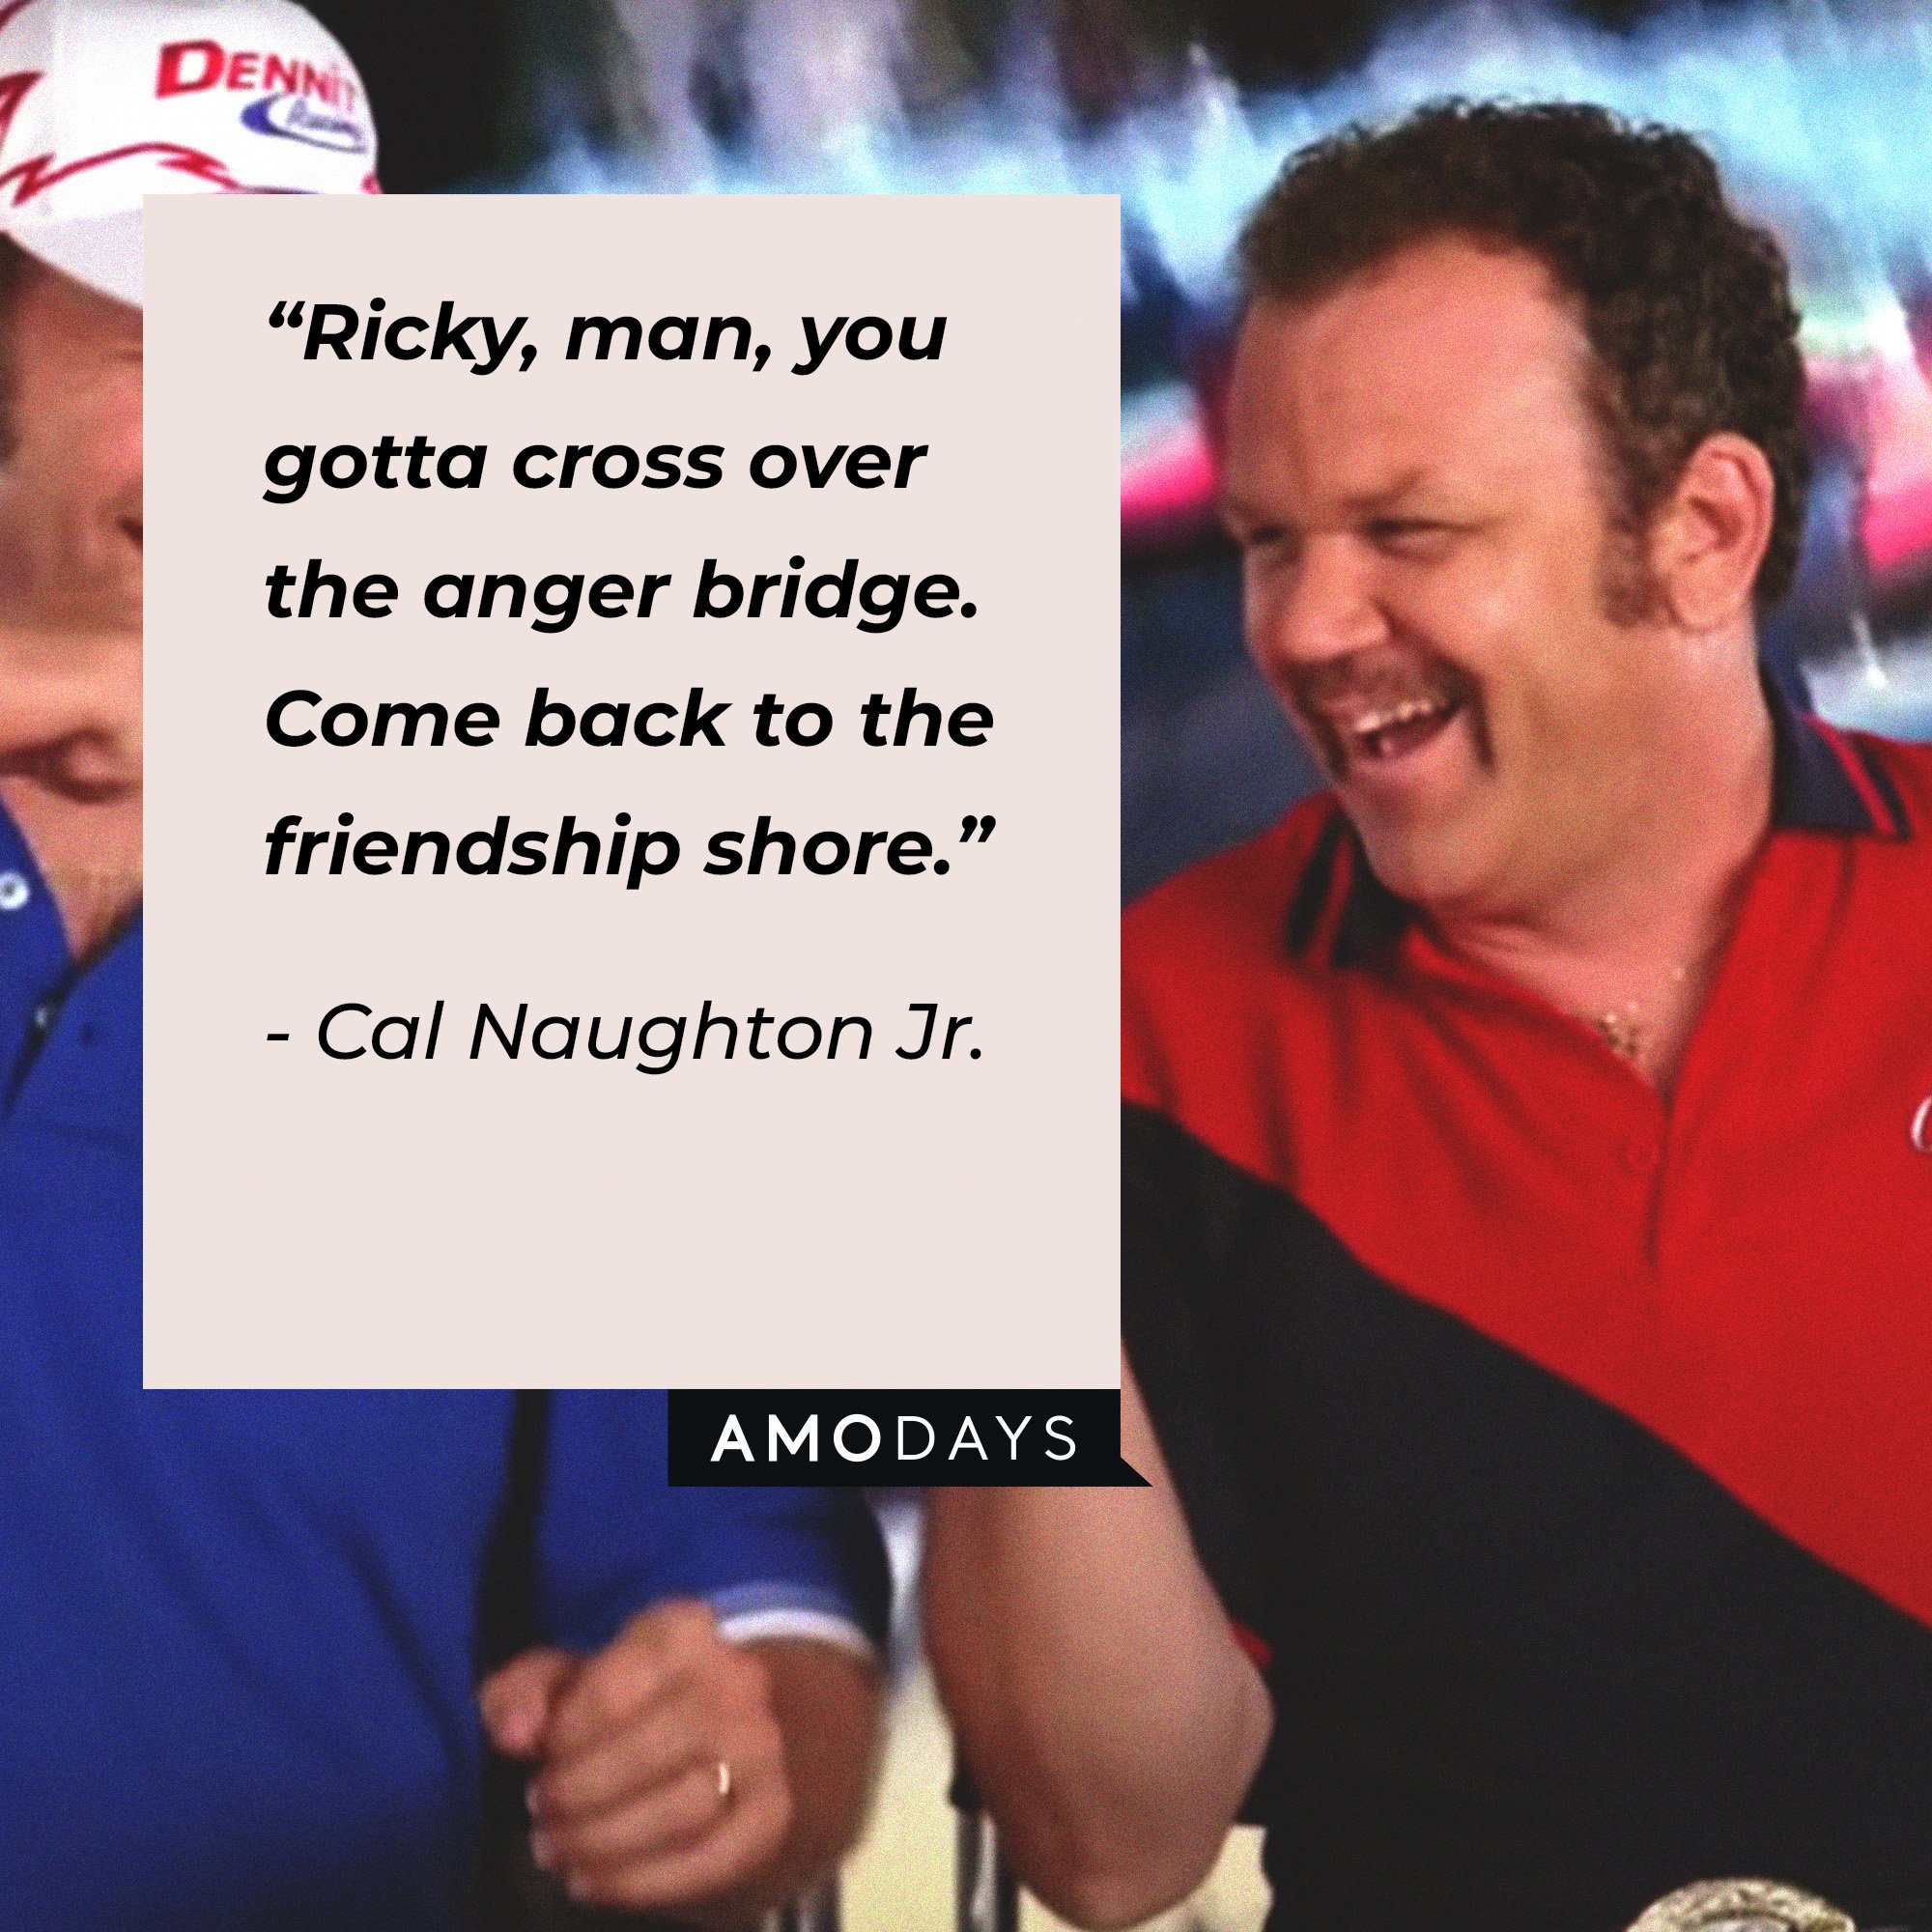 Cal Naughton Jr.’s quote: “Ricky, man, you gotta cross over the anger bridge. Come back to the friendship shore.” | Image: AmoDays